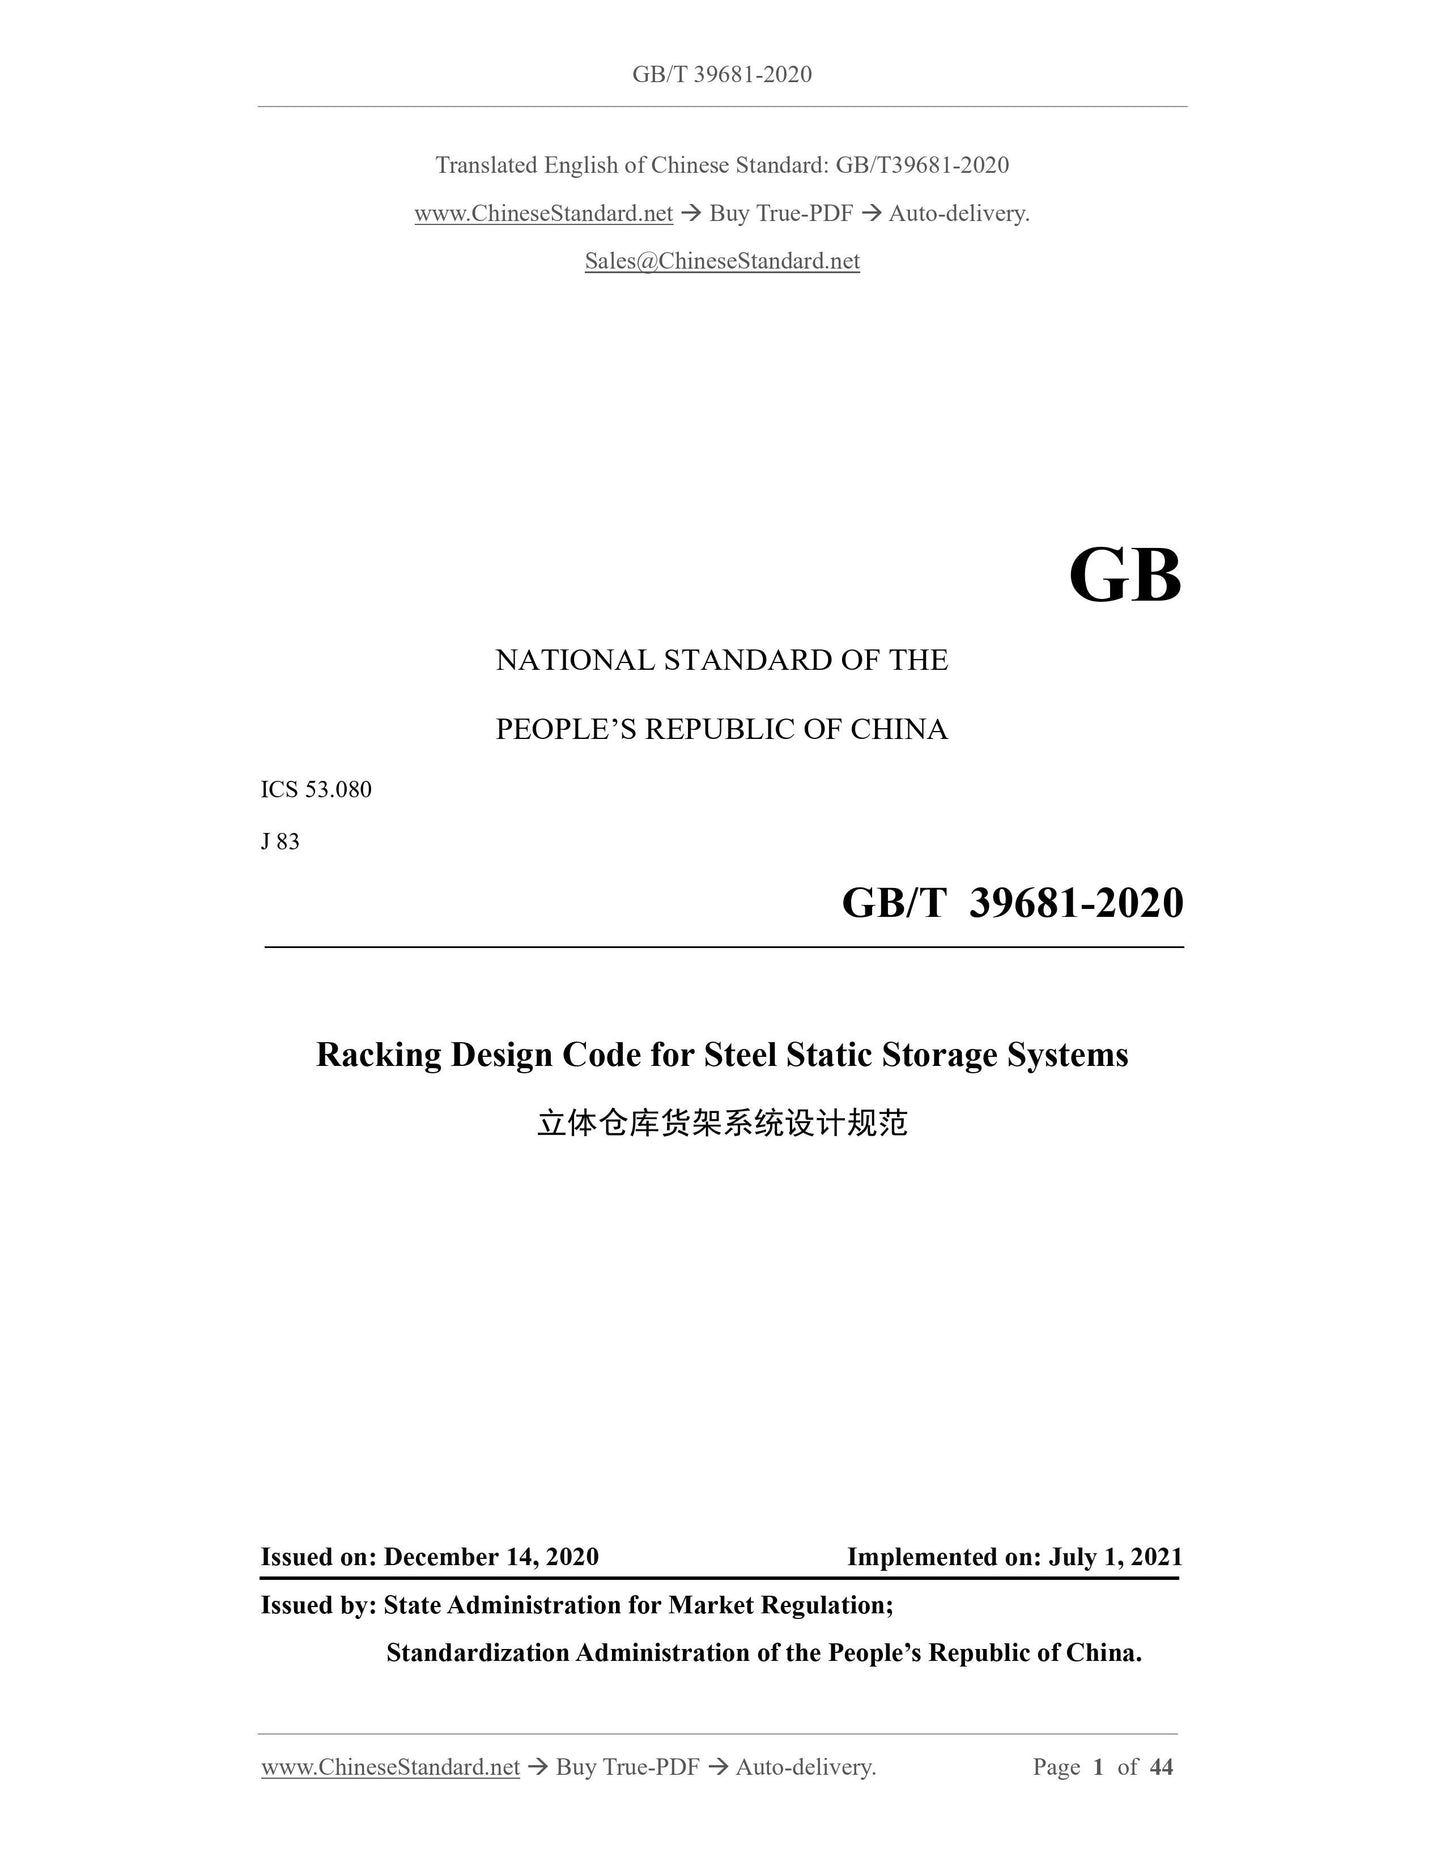 GB/T 39681-2020 Page 1